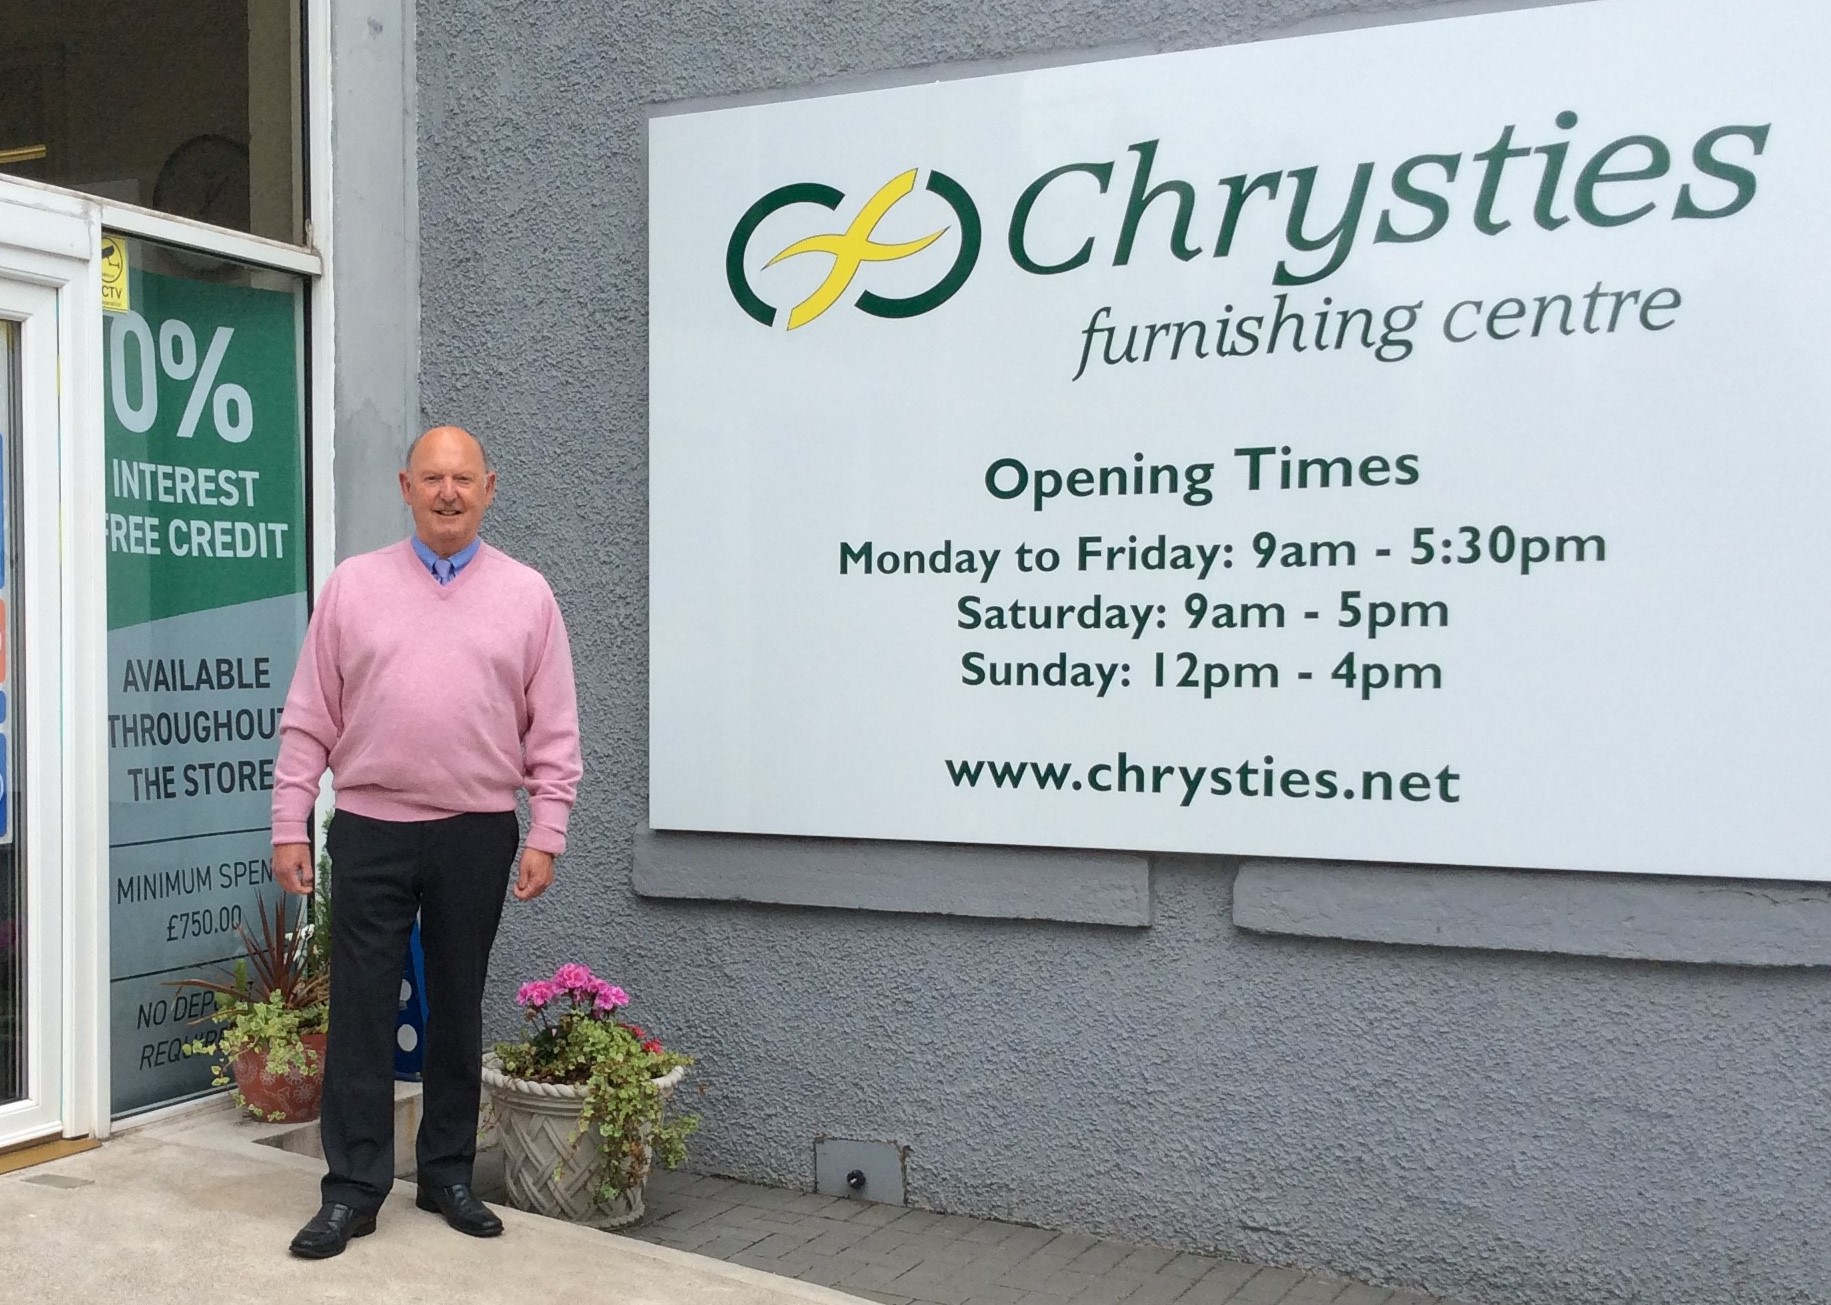 Chrysties Furnishing Centre reopens thanks to £200,000 CBILS funding package from RBS